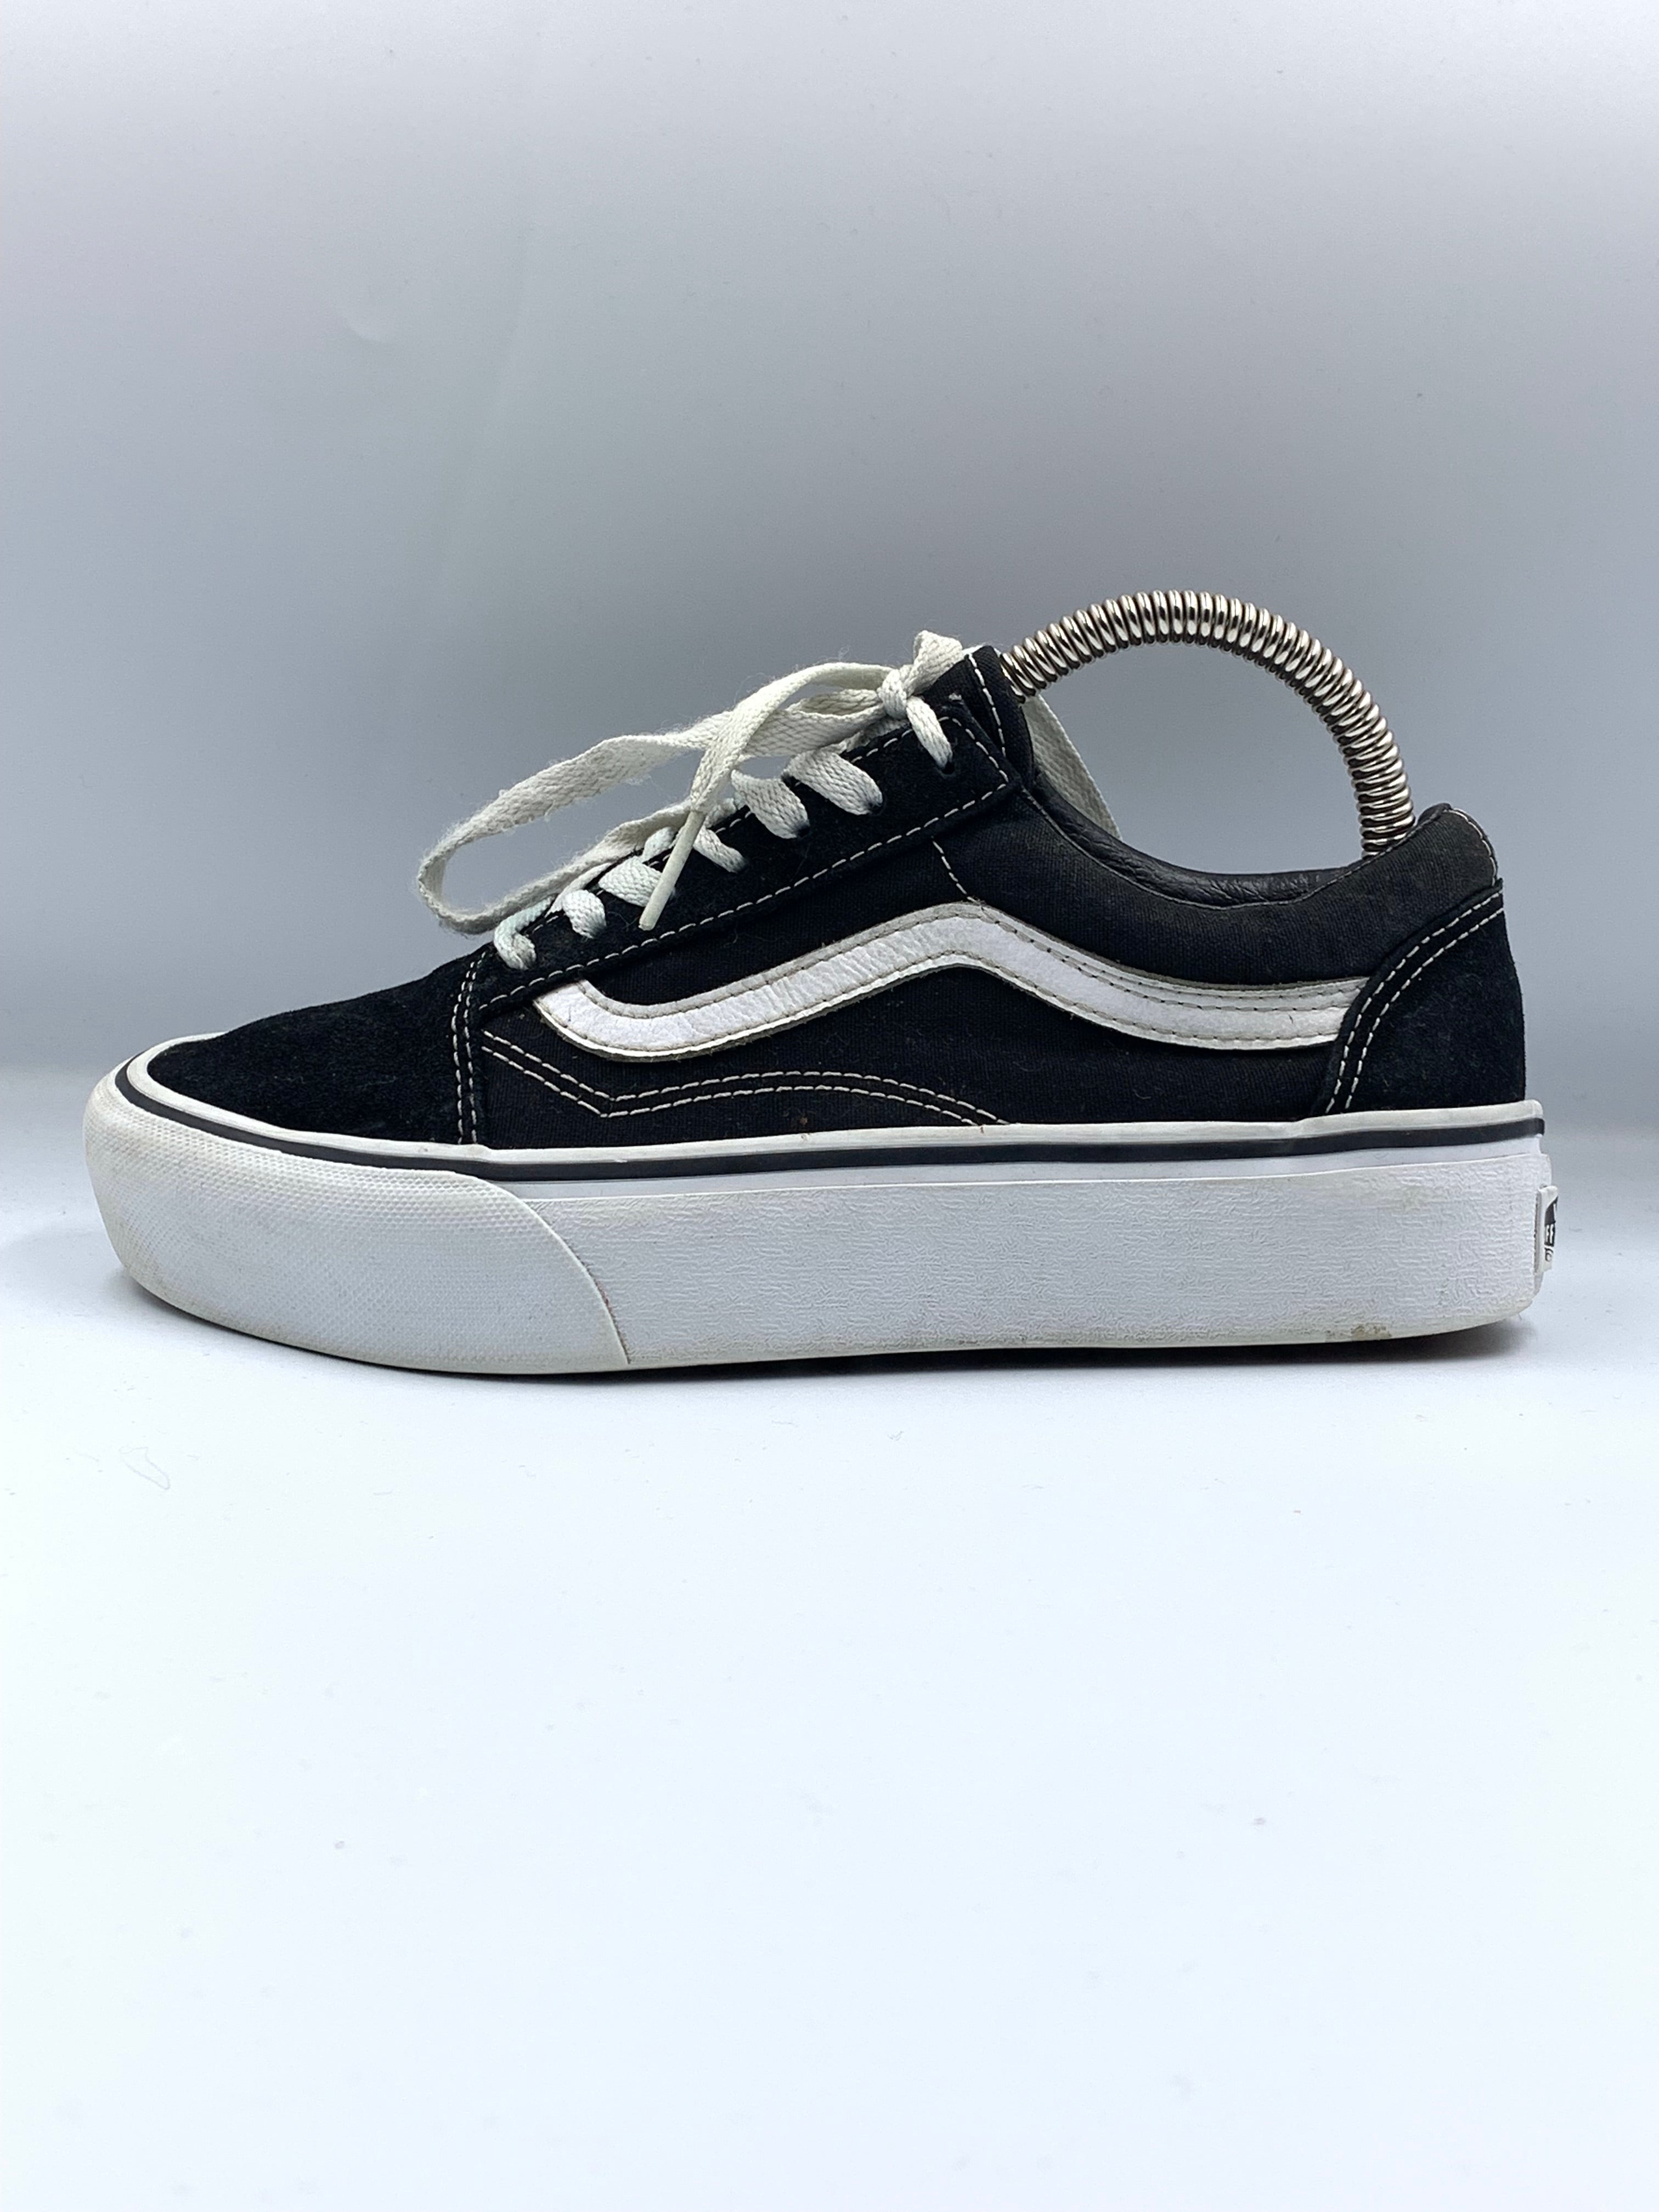 Vans Of The Wall Original Brand Sports Black Running For Women Shoes